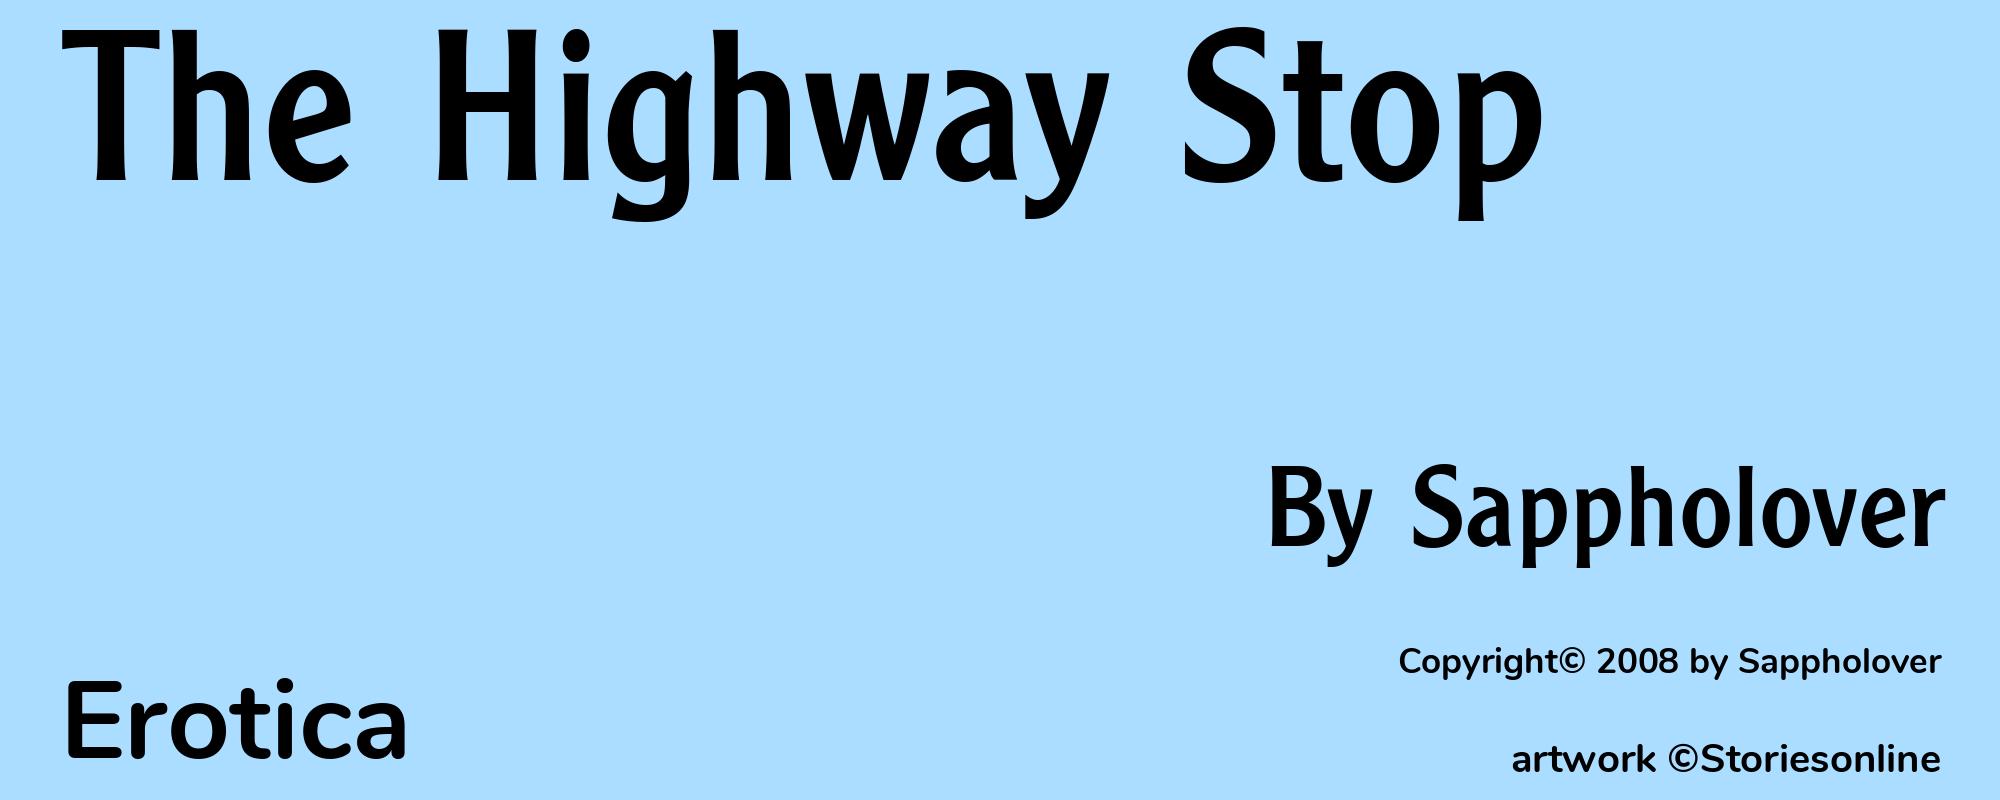 The Highway Stop  - Cover